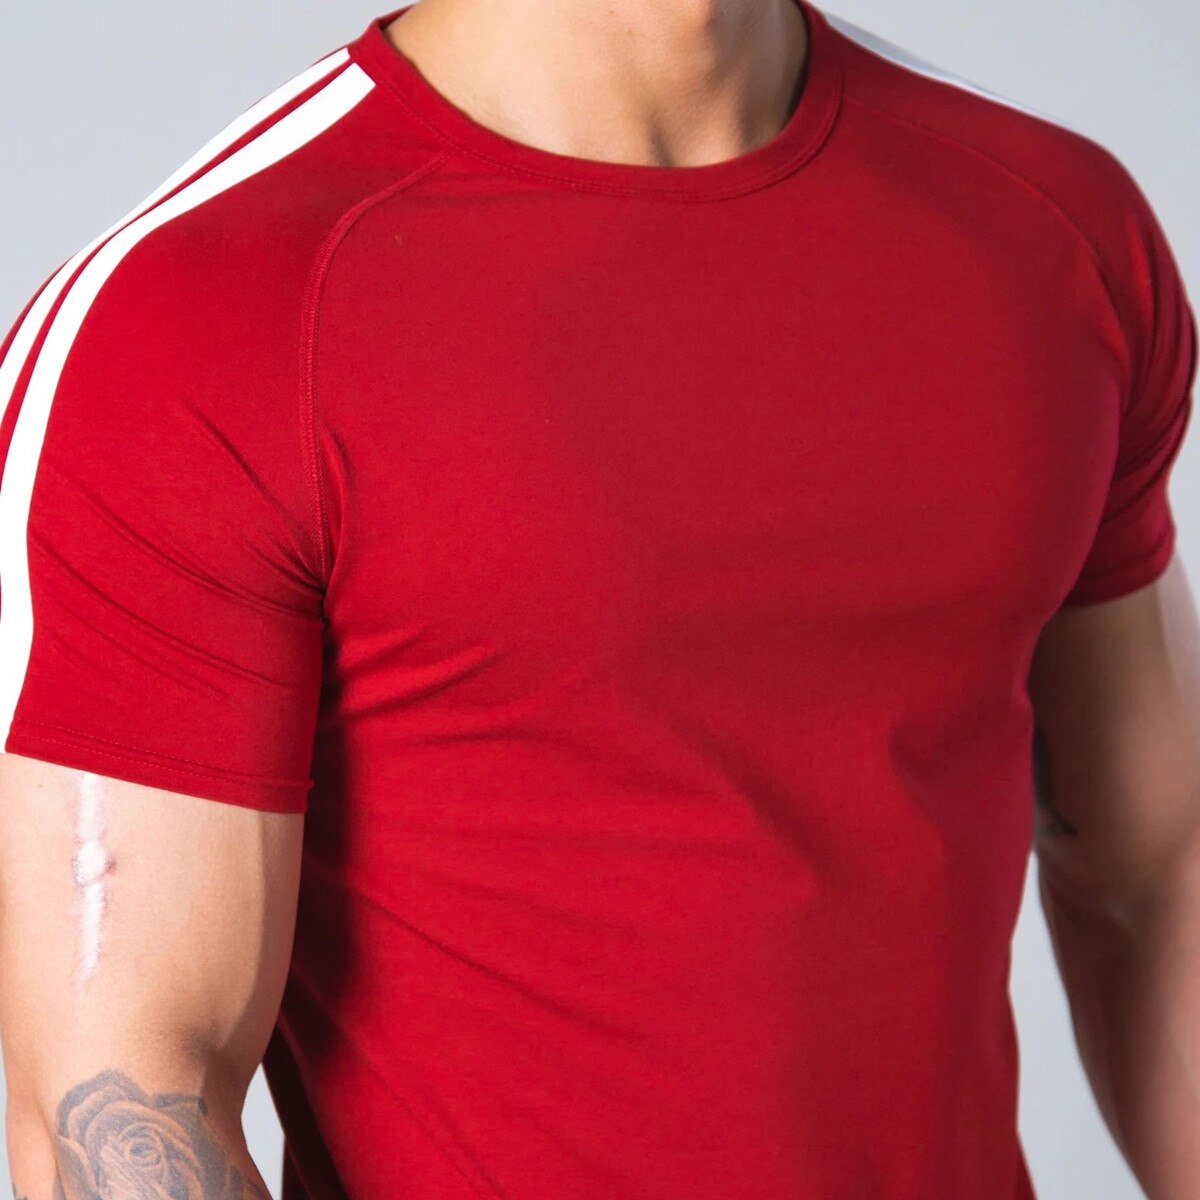 Men Red Gym Fitness T-shirt